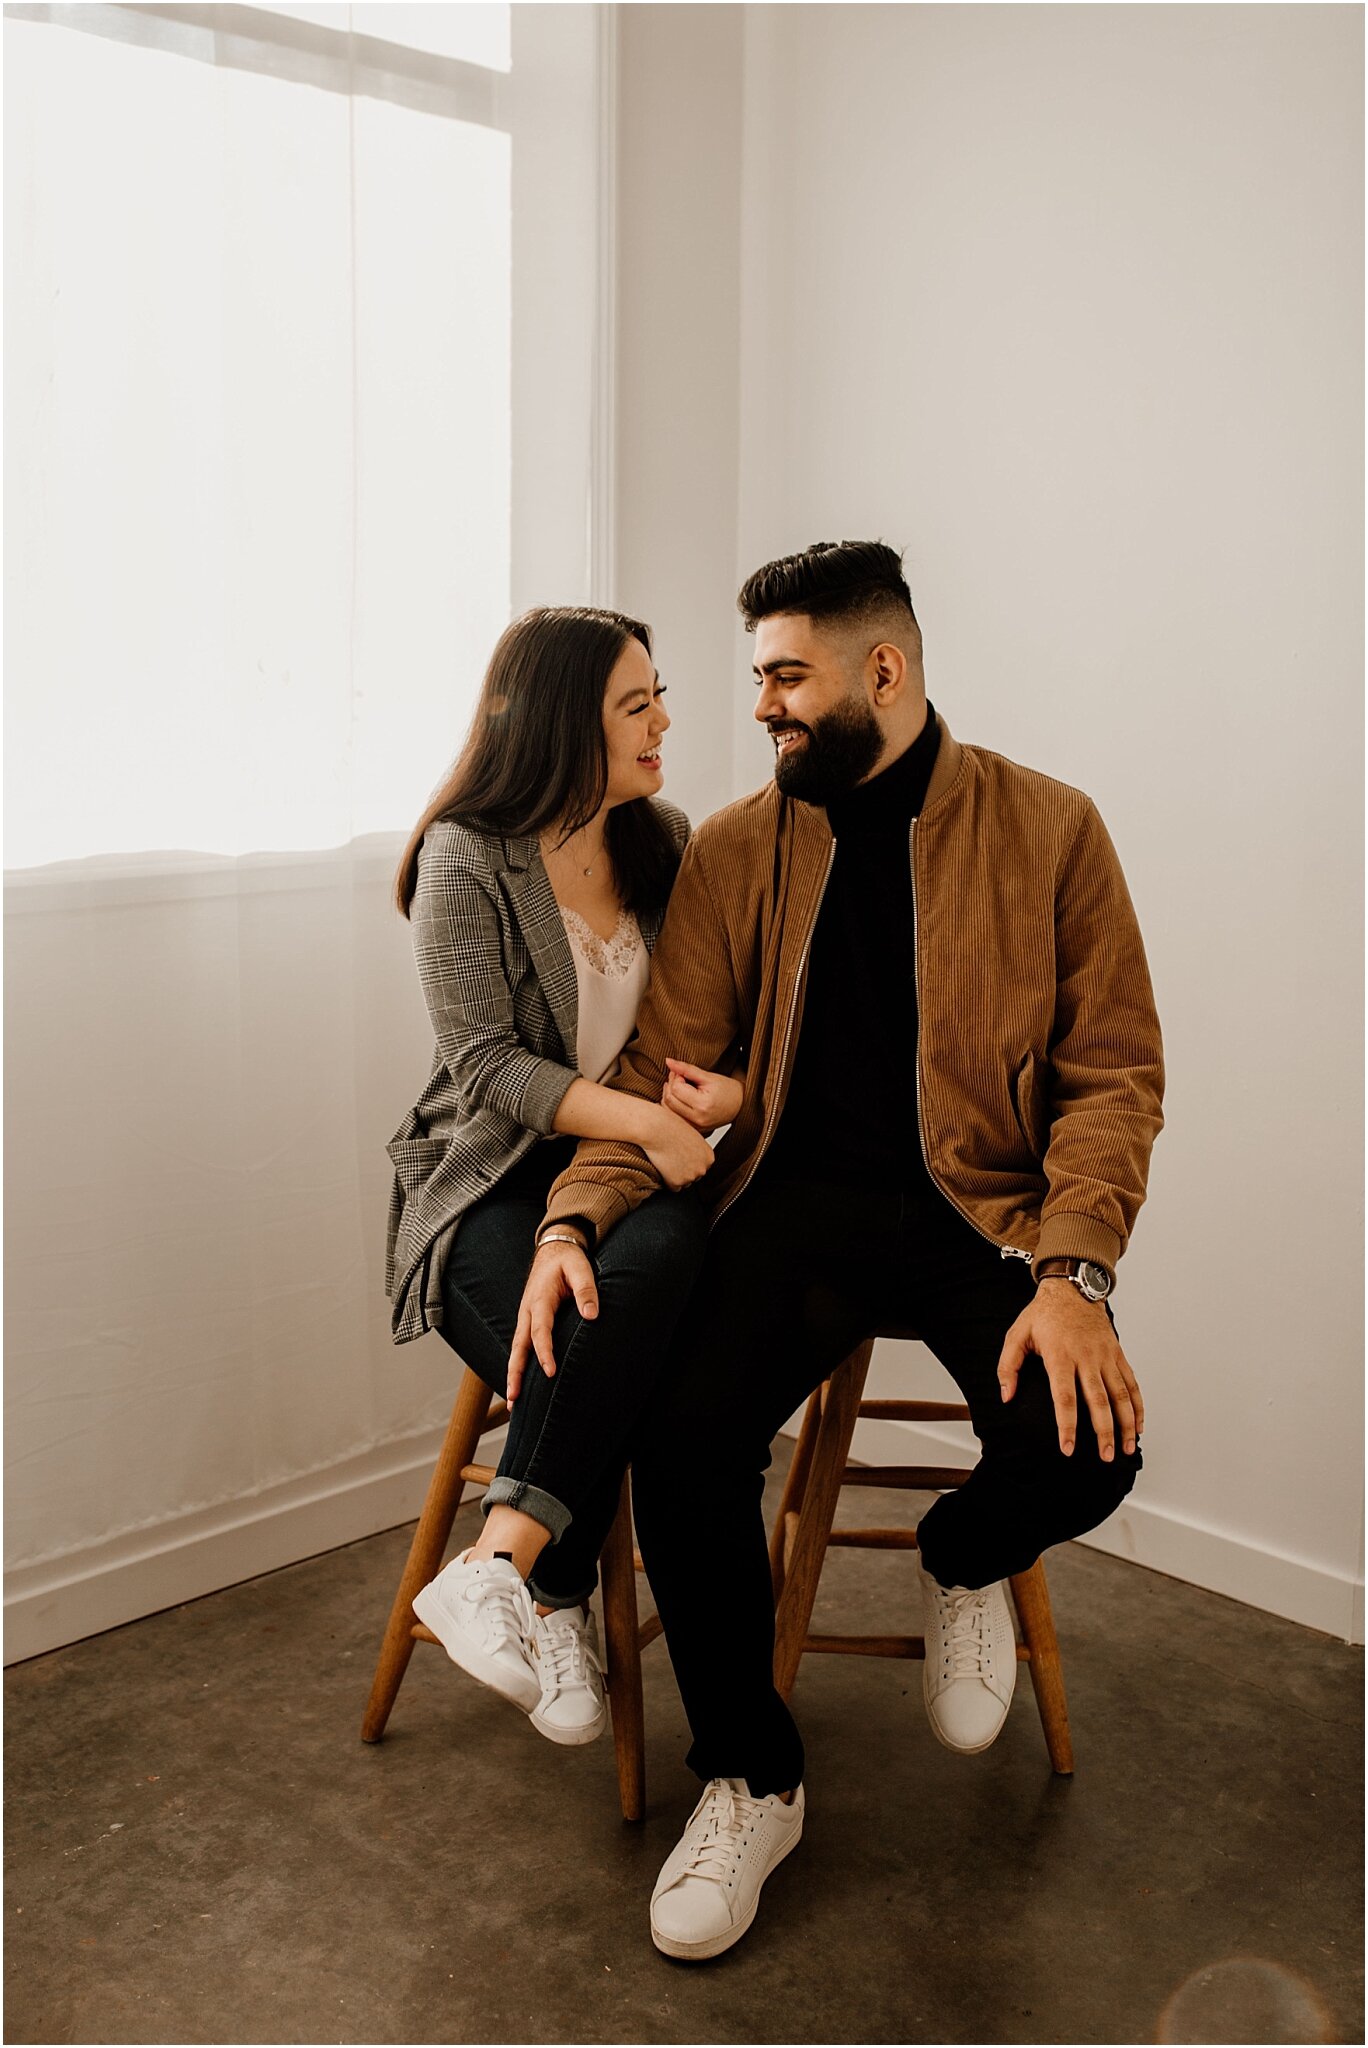 interracial couple sitting on wooden stools smiling portrait in natural light studio in vancouver